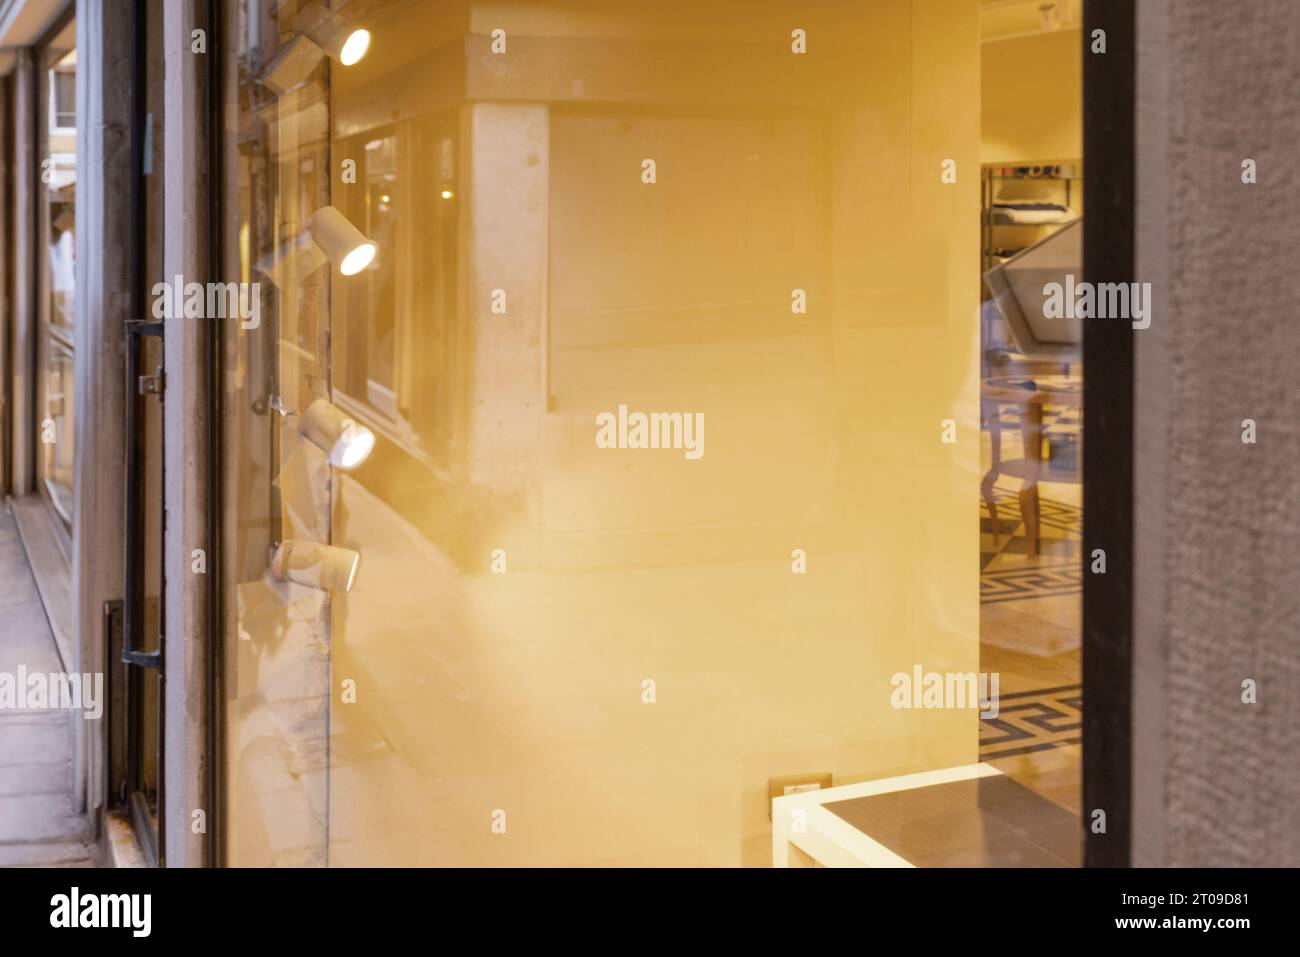 Shop window with a clear glass surface for logo or text prtesentation. View of the well lit interior, warm glow Stock Photo